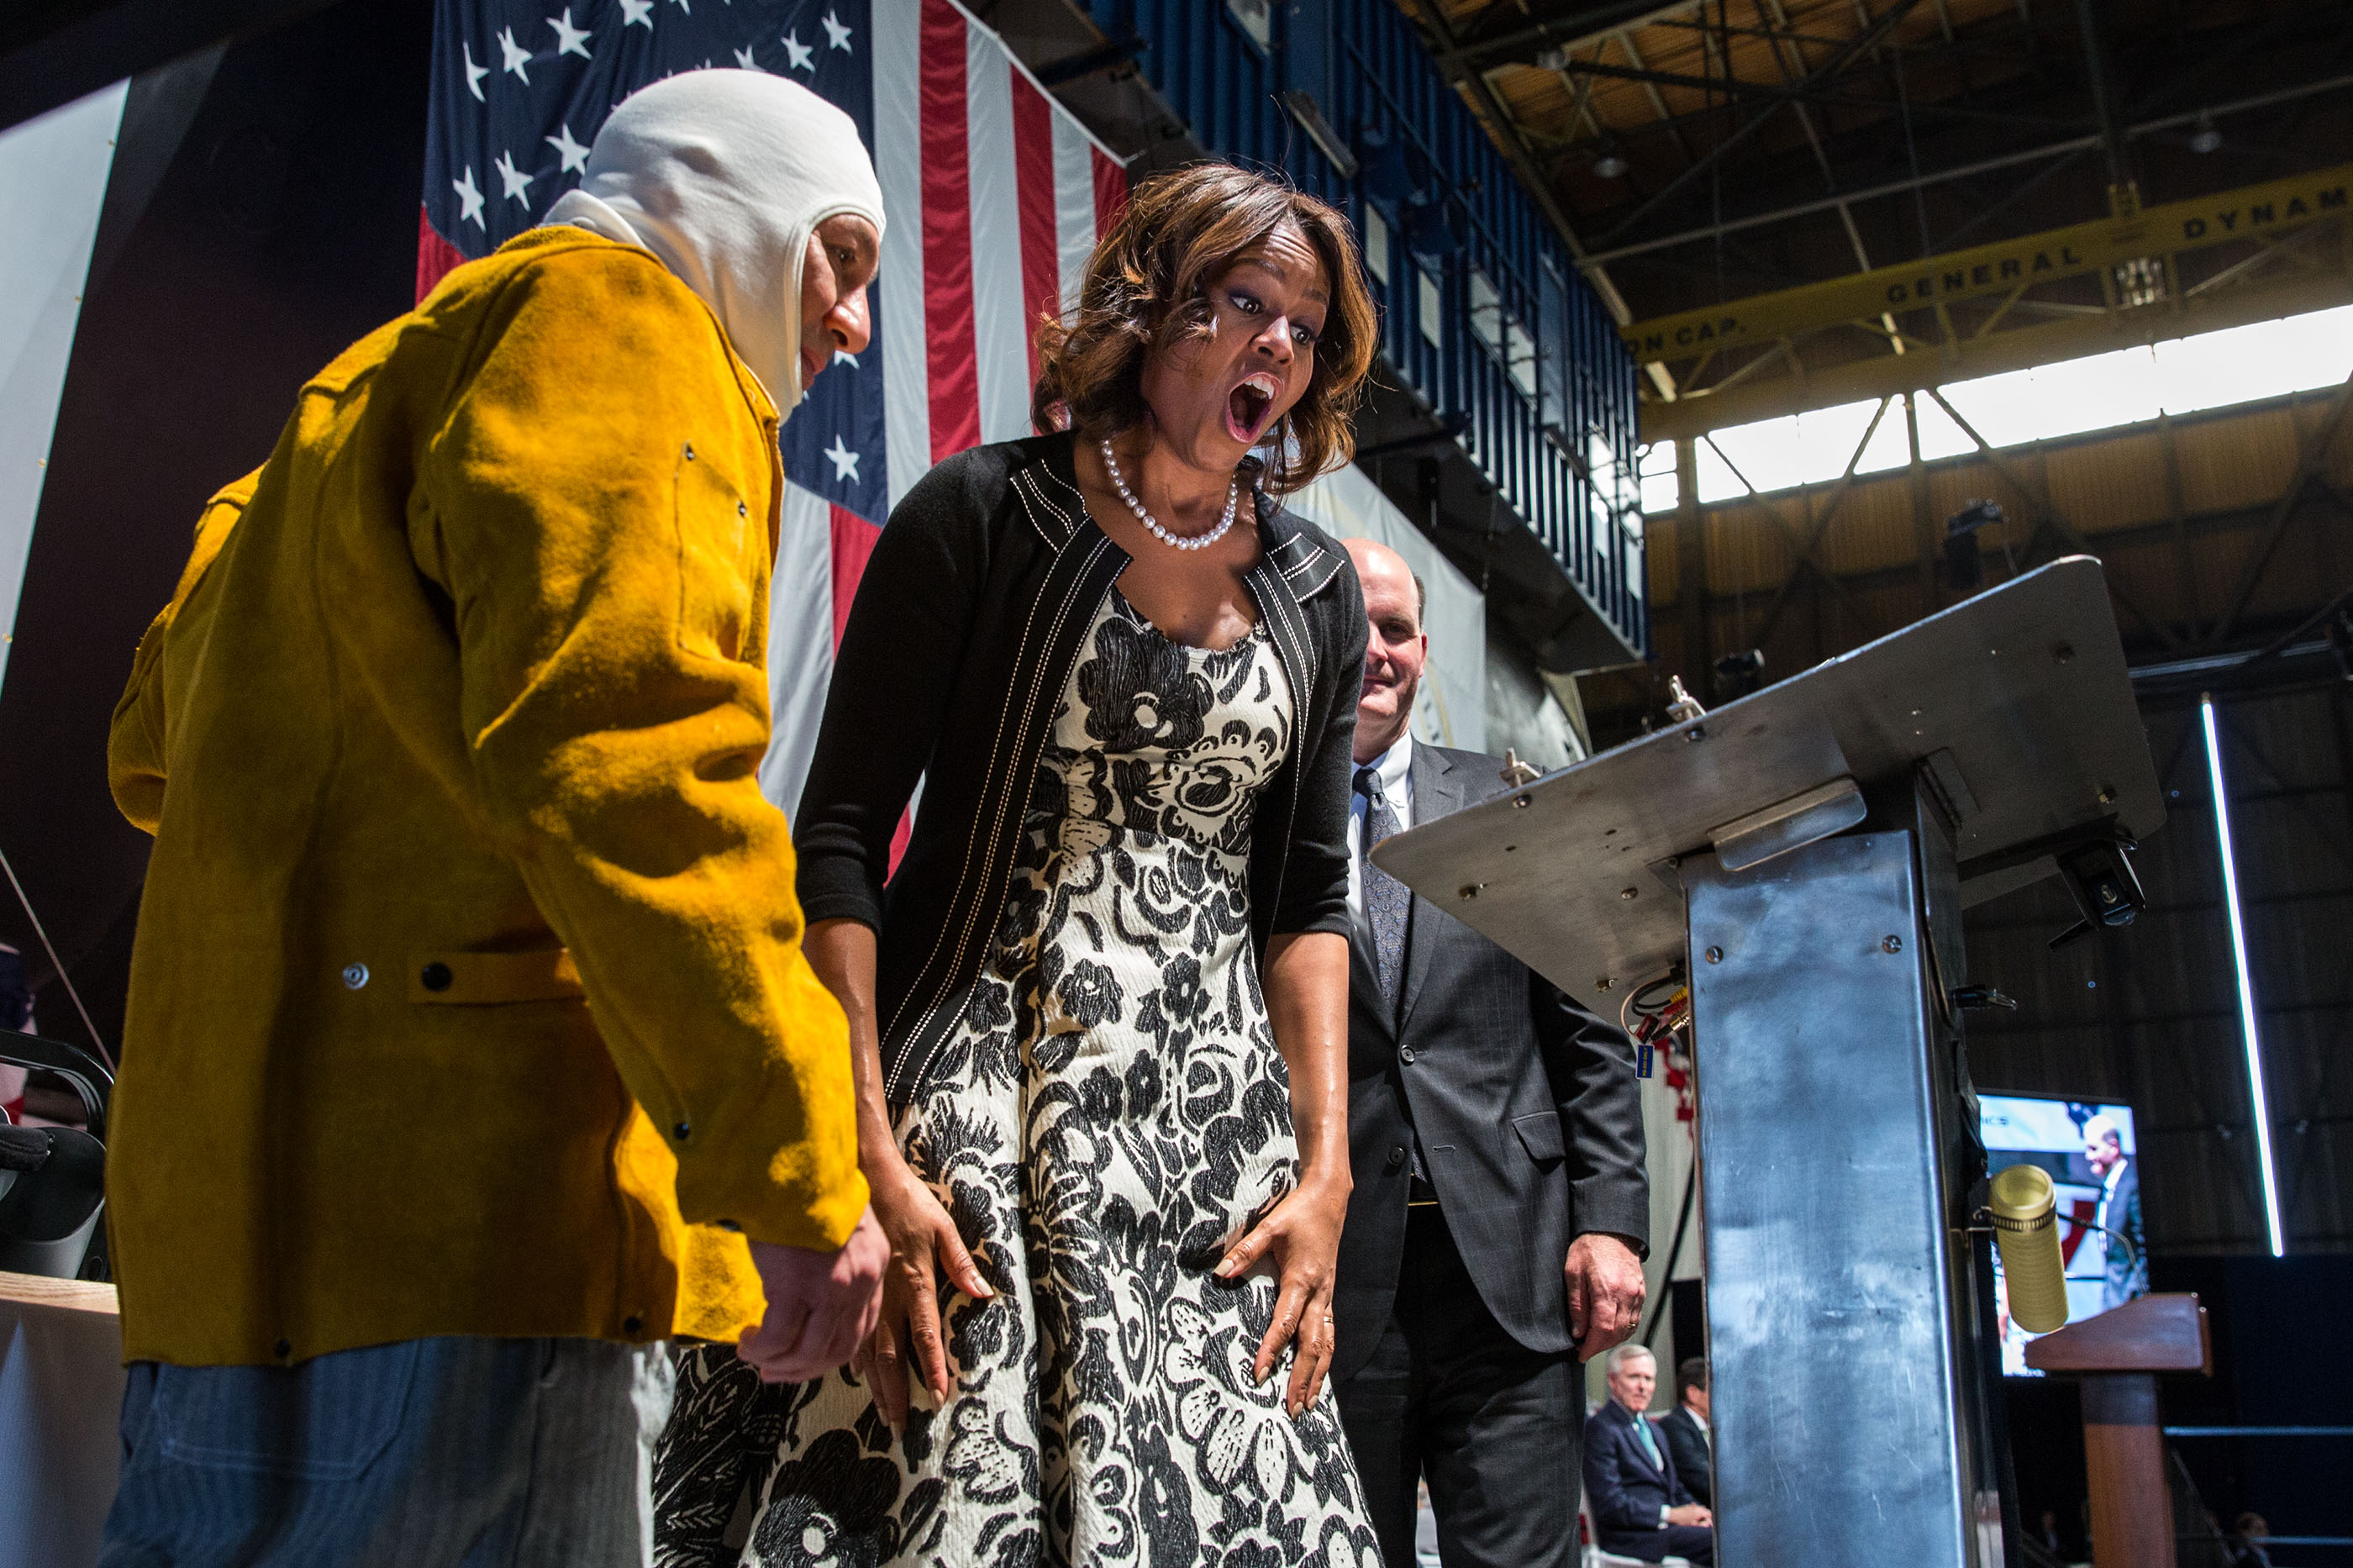 The First Lady reacts to seeing her initials welded onto a steel plate during a keel-laying ceremony for the USS Illinois in North Kingston, R.I., June 2, 2014. (Official White House Photo by Chuck Kennedy)